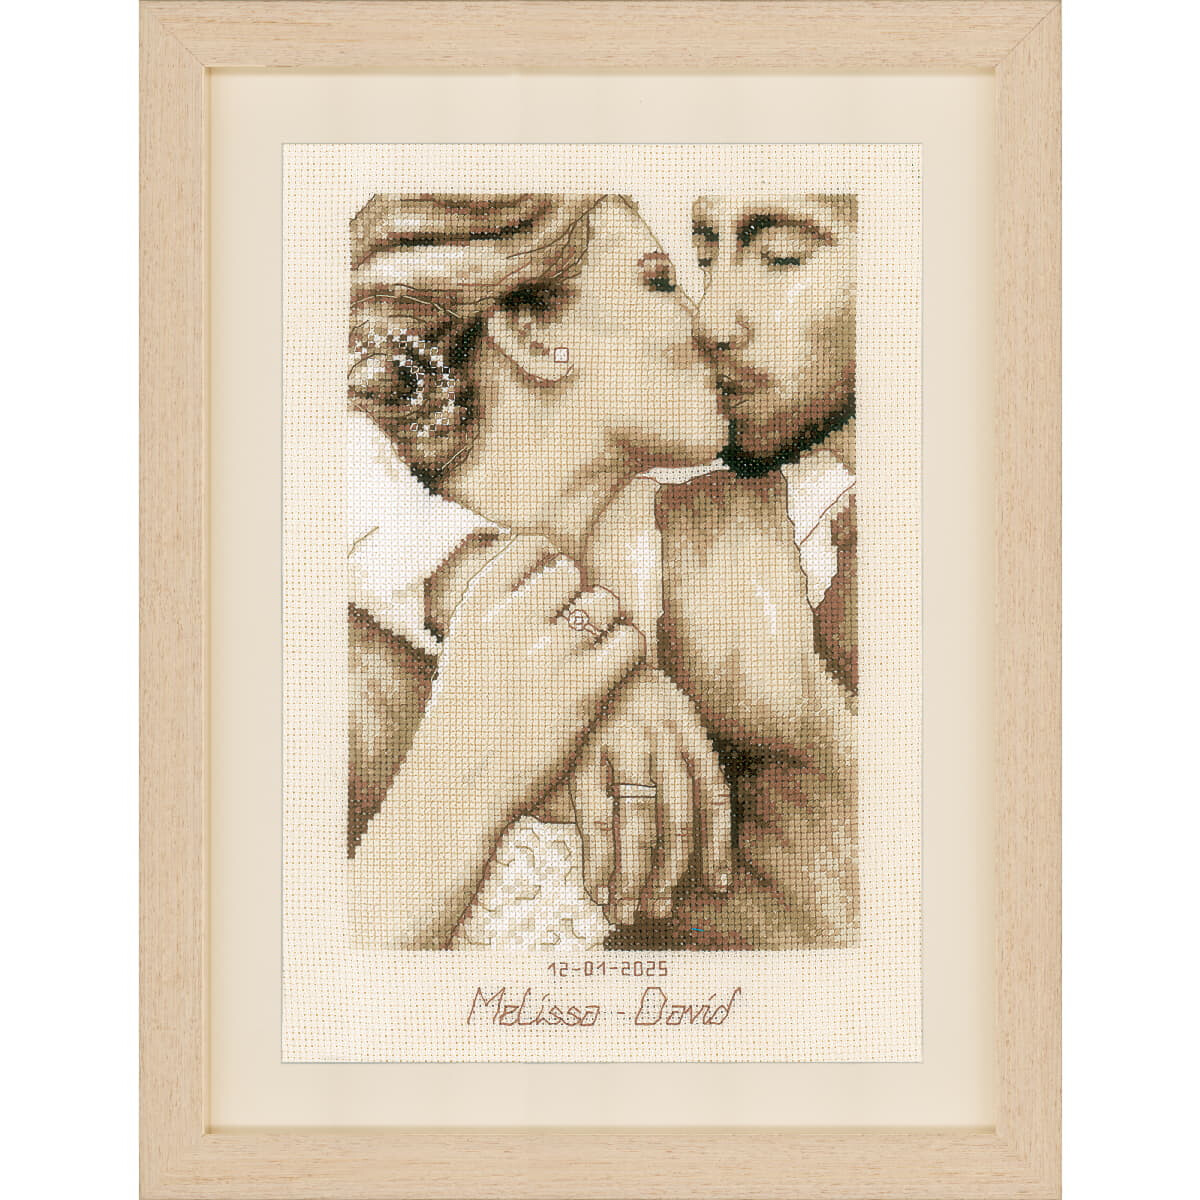 Vervaco counted cross stitch kit "Loving Kiss",...